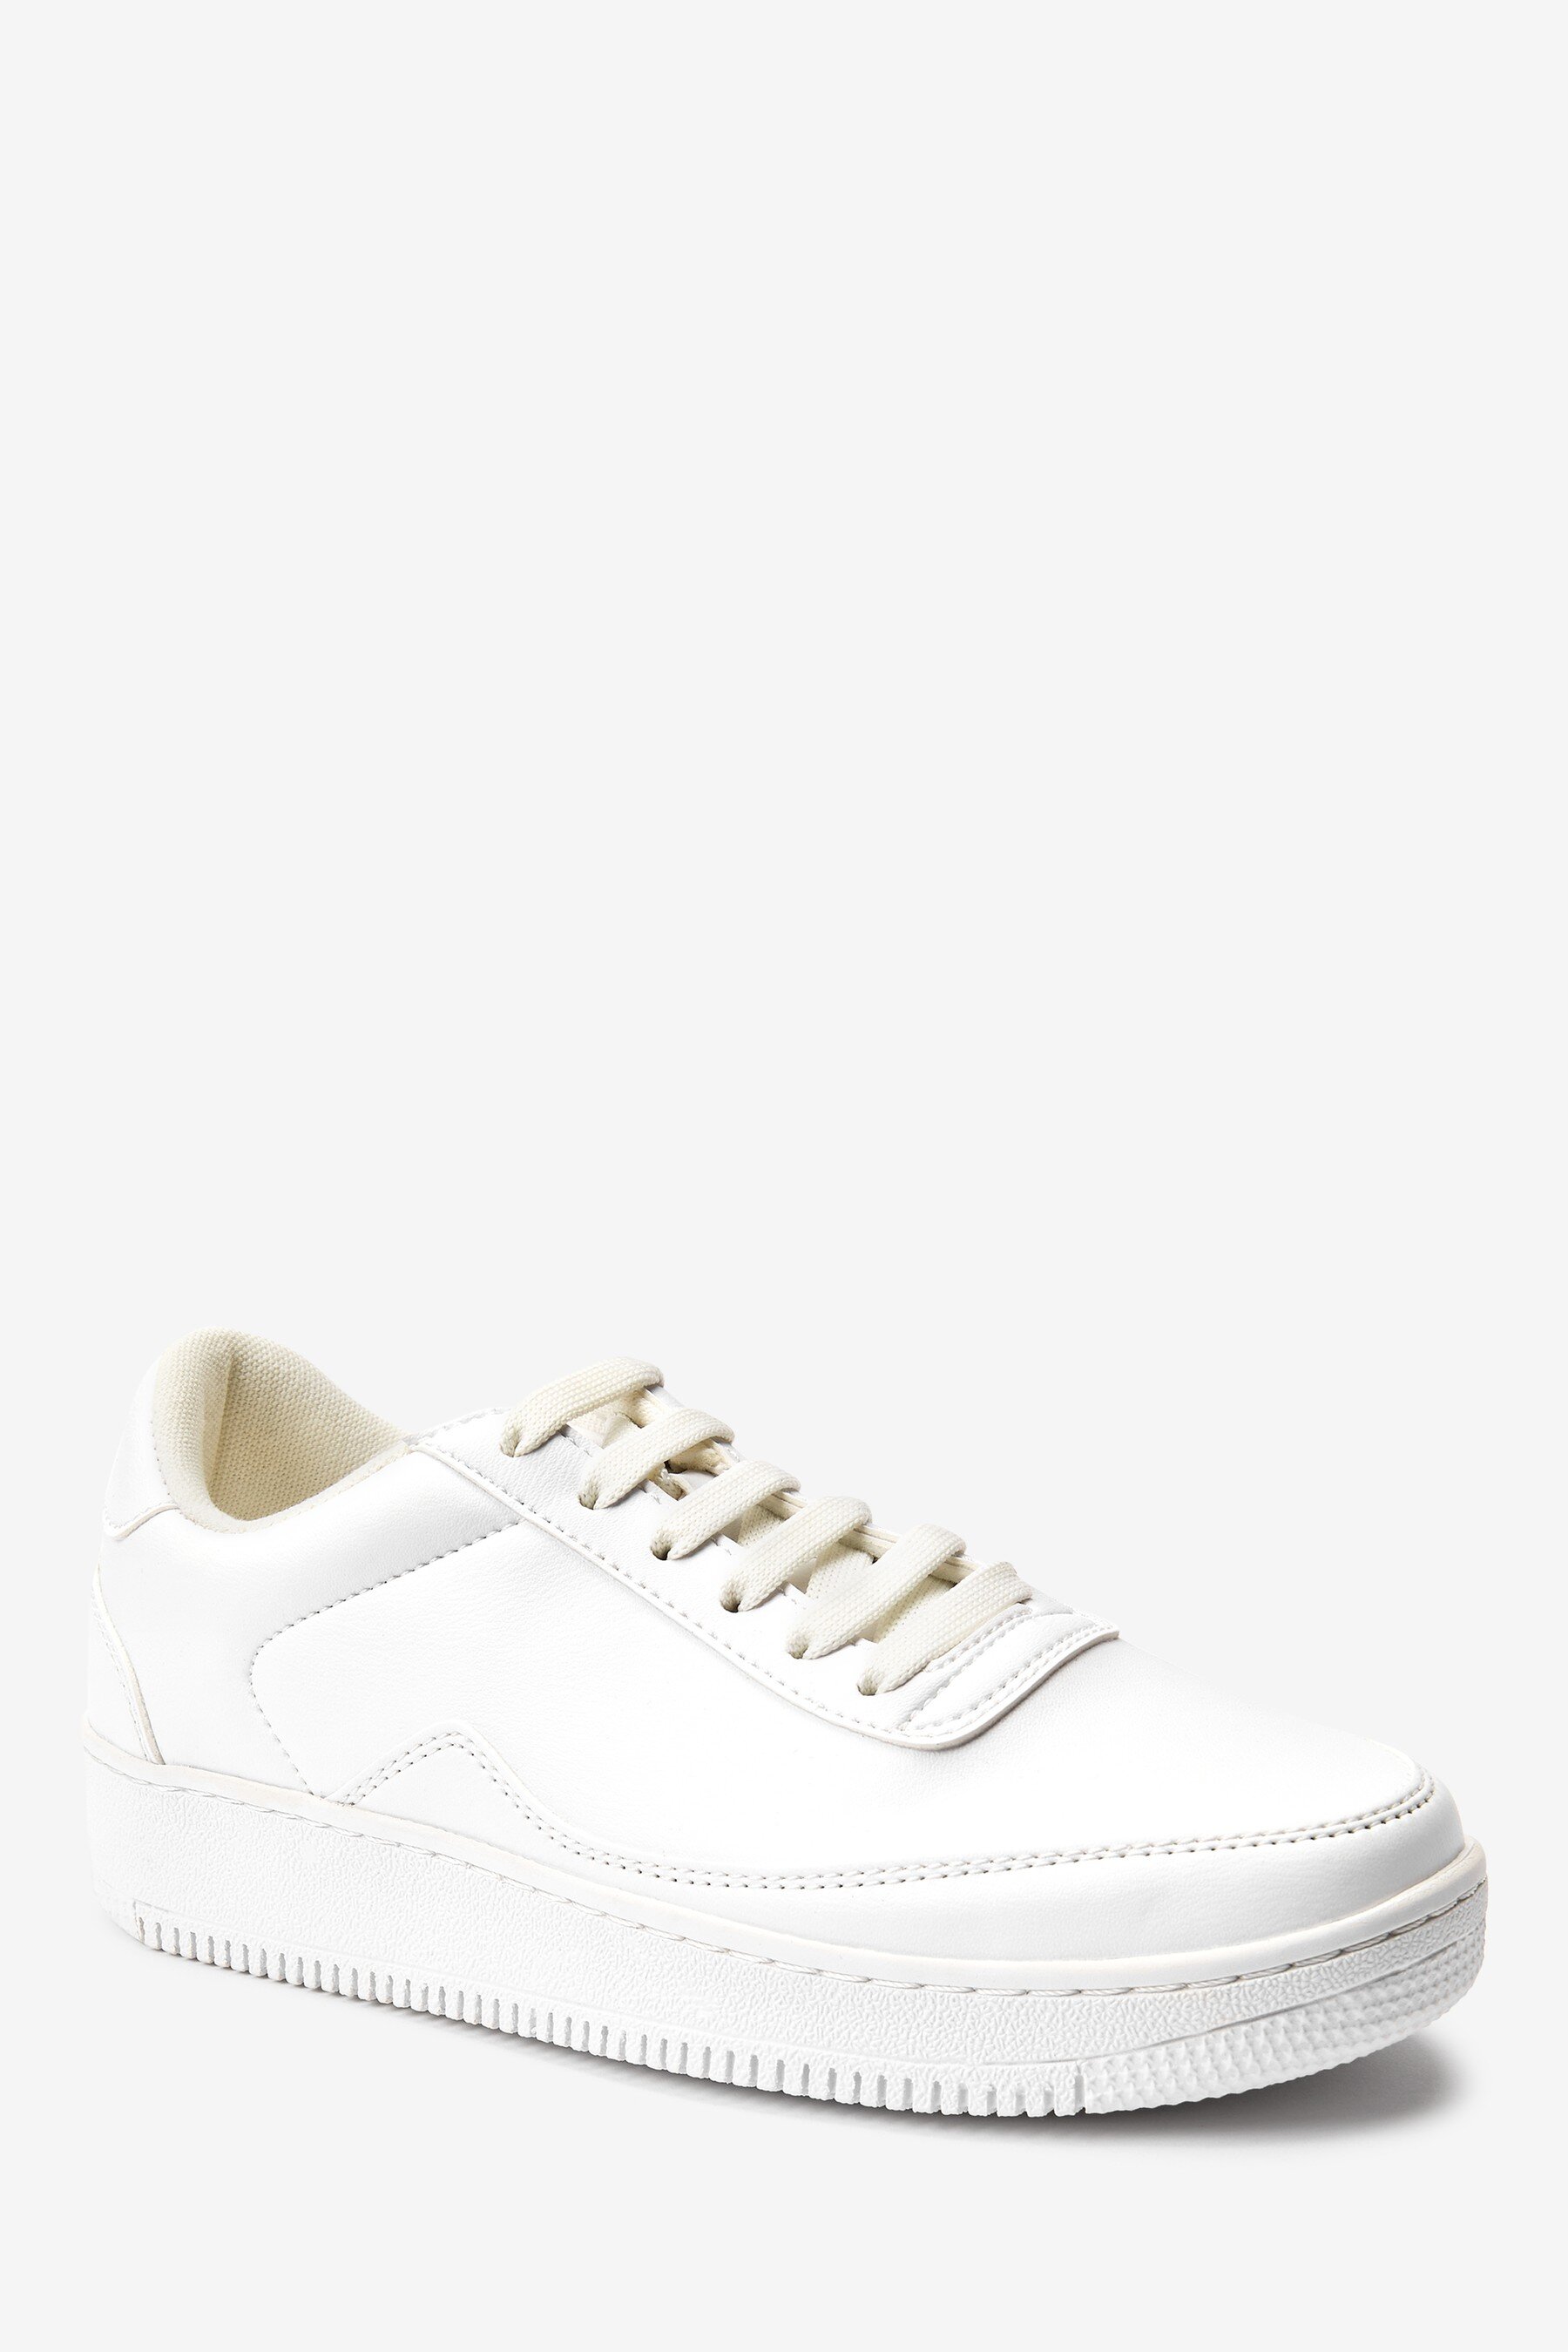 Trainers, £40, Next